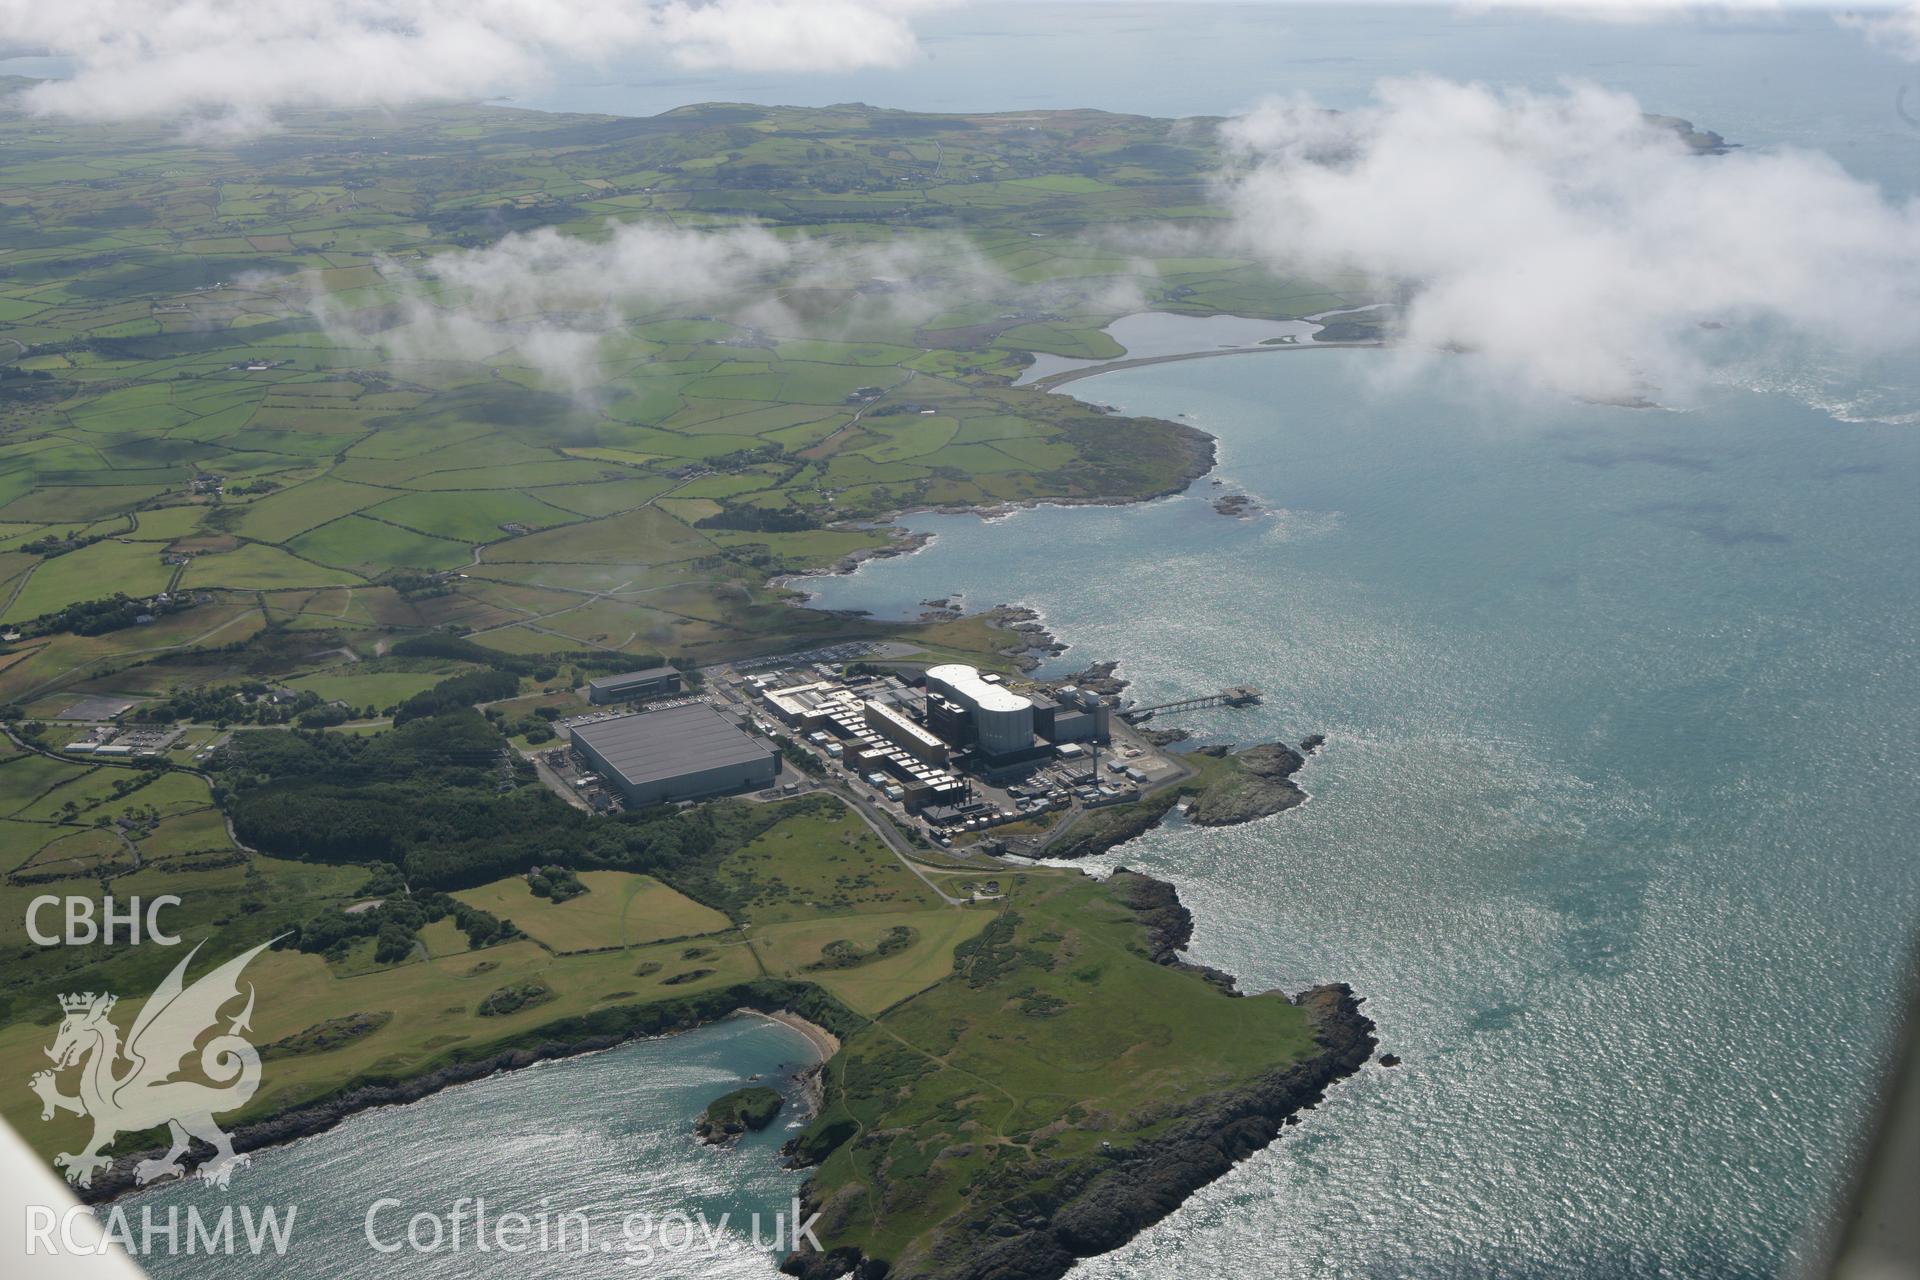 RCAHMW colour oblique photograph of Wylfa Nuclear Power Station, high view. Taken by Toby Driver on 20/07/2011.